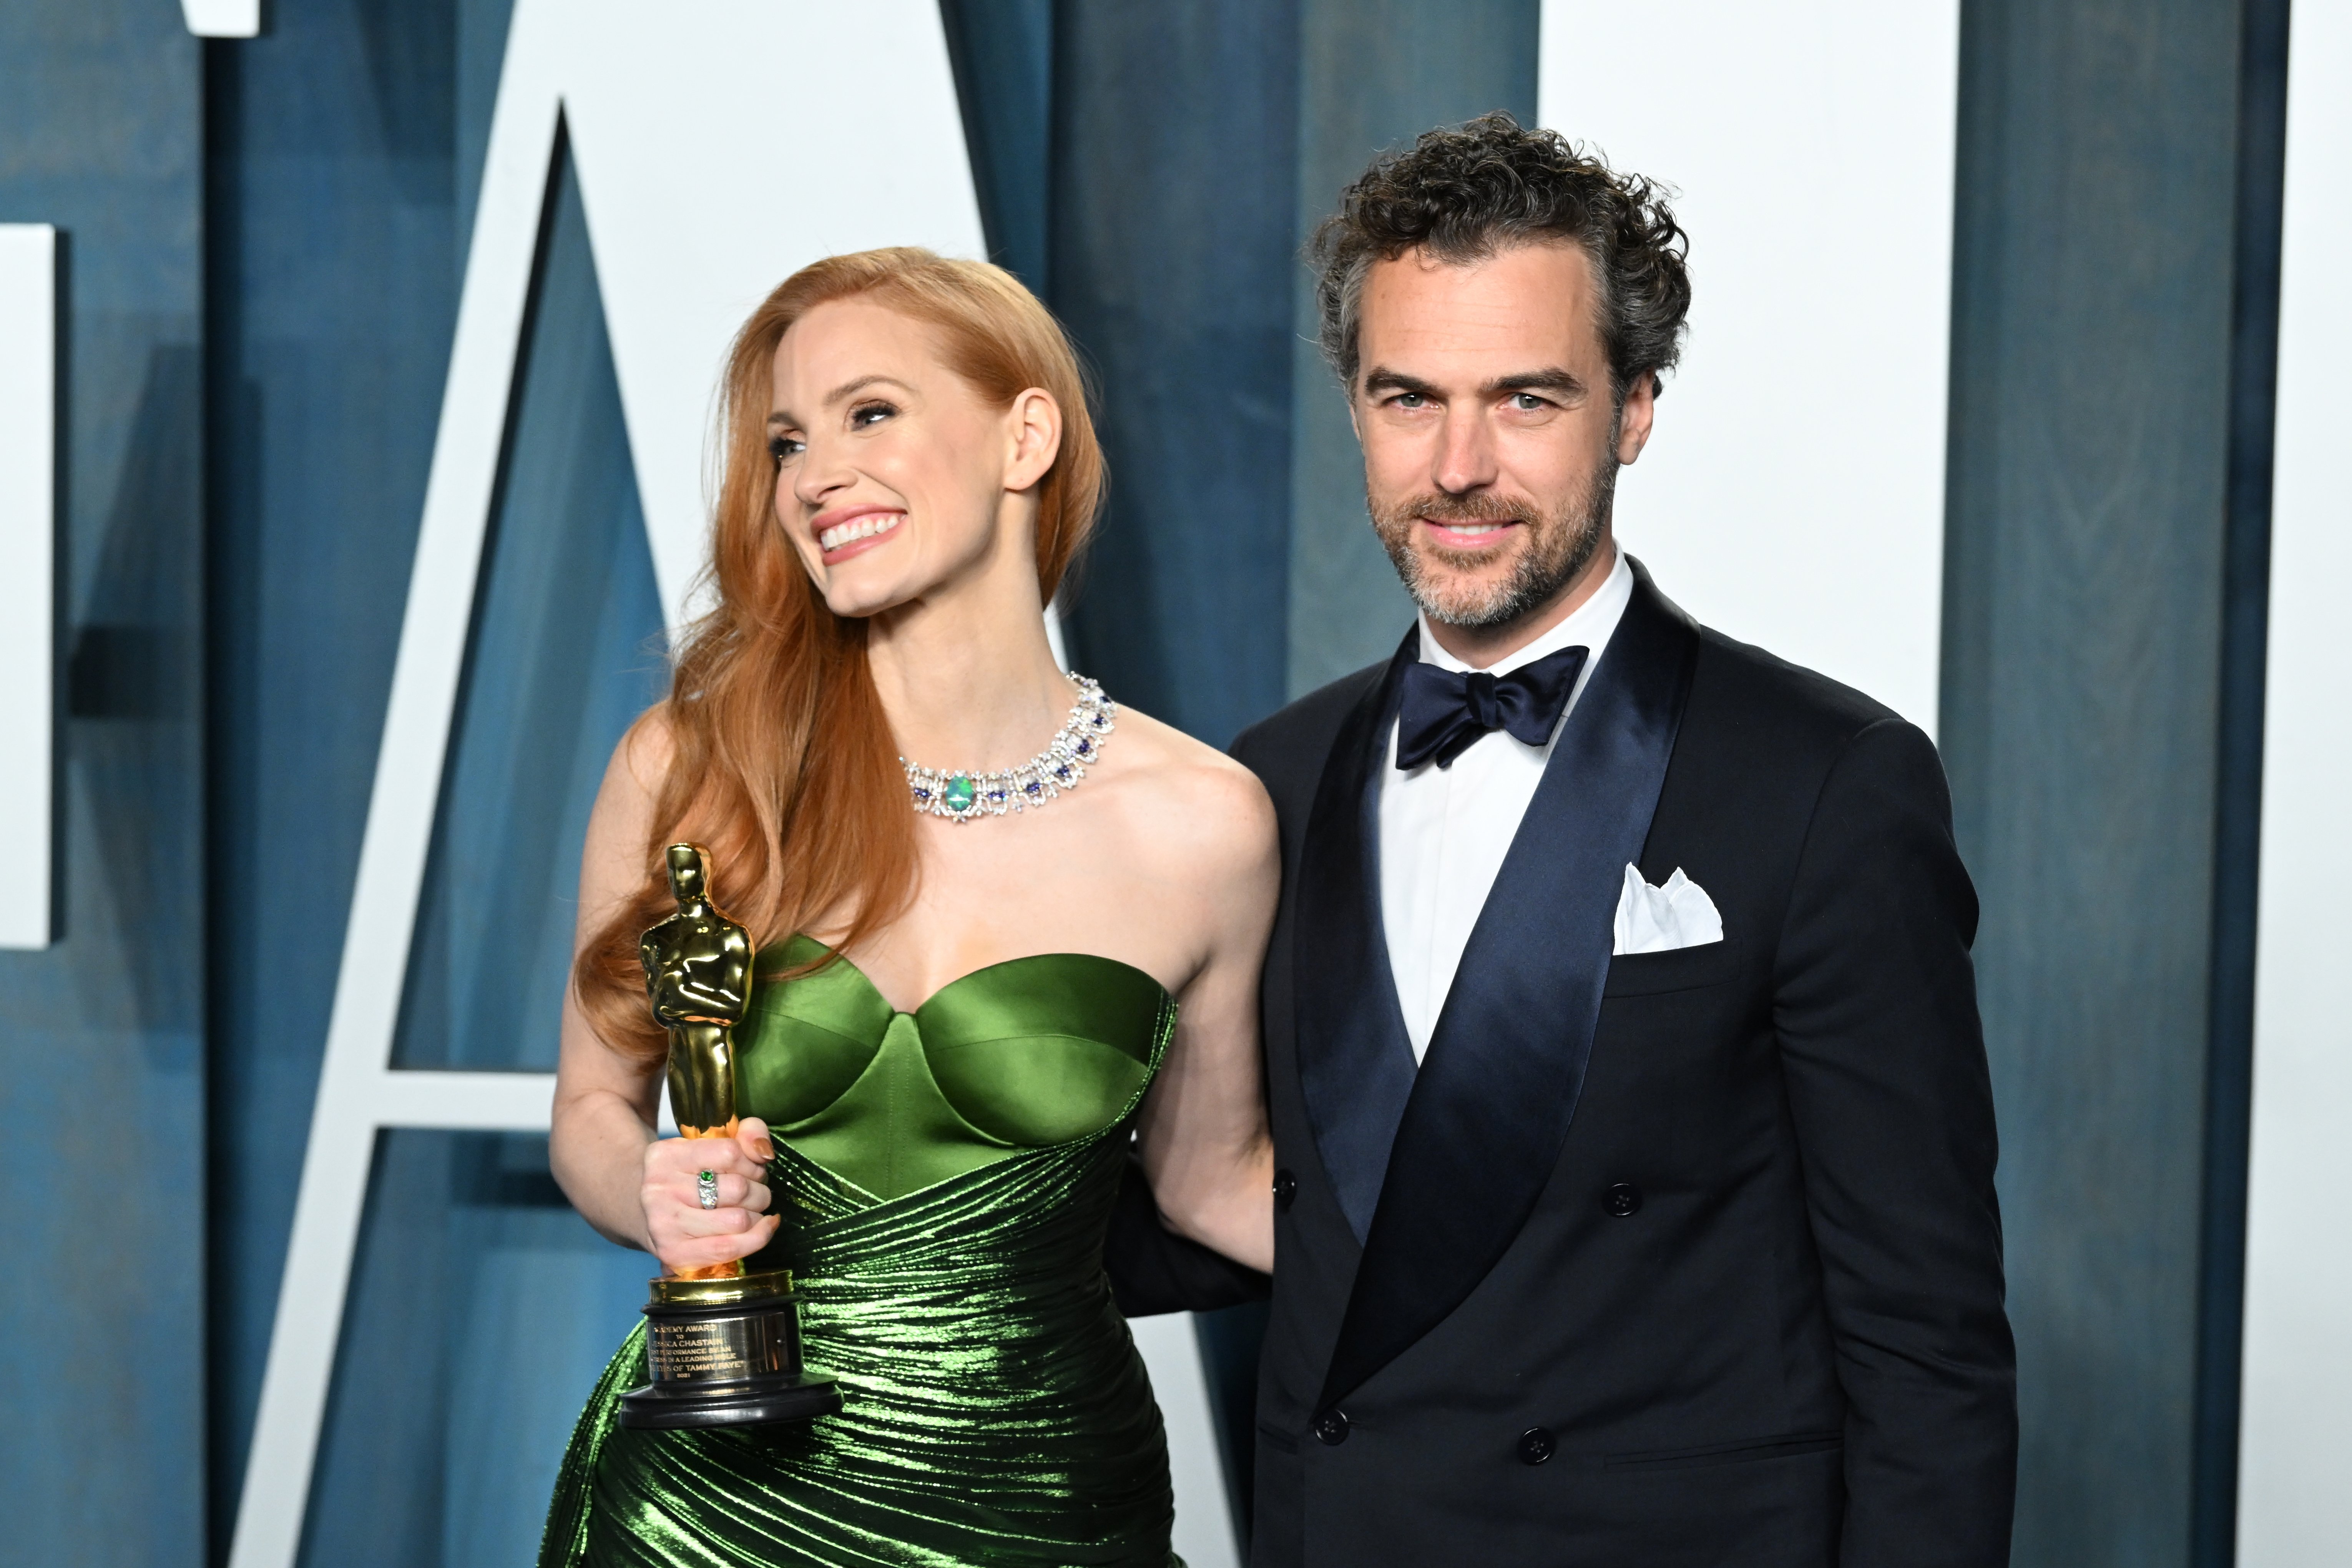 Jessica Chastain and Gianluca Passi attend 2022 Vanity Fair Oscar Party Hosted By Radhika Jones | Source: Getty Images